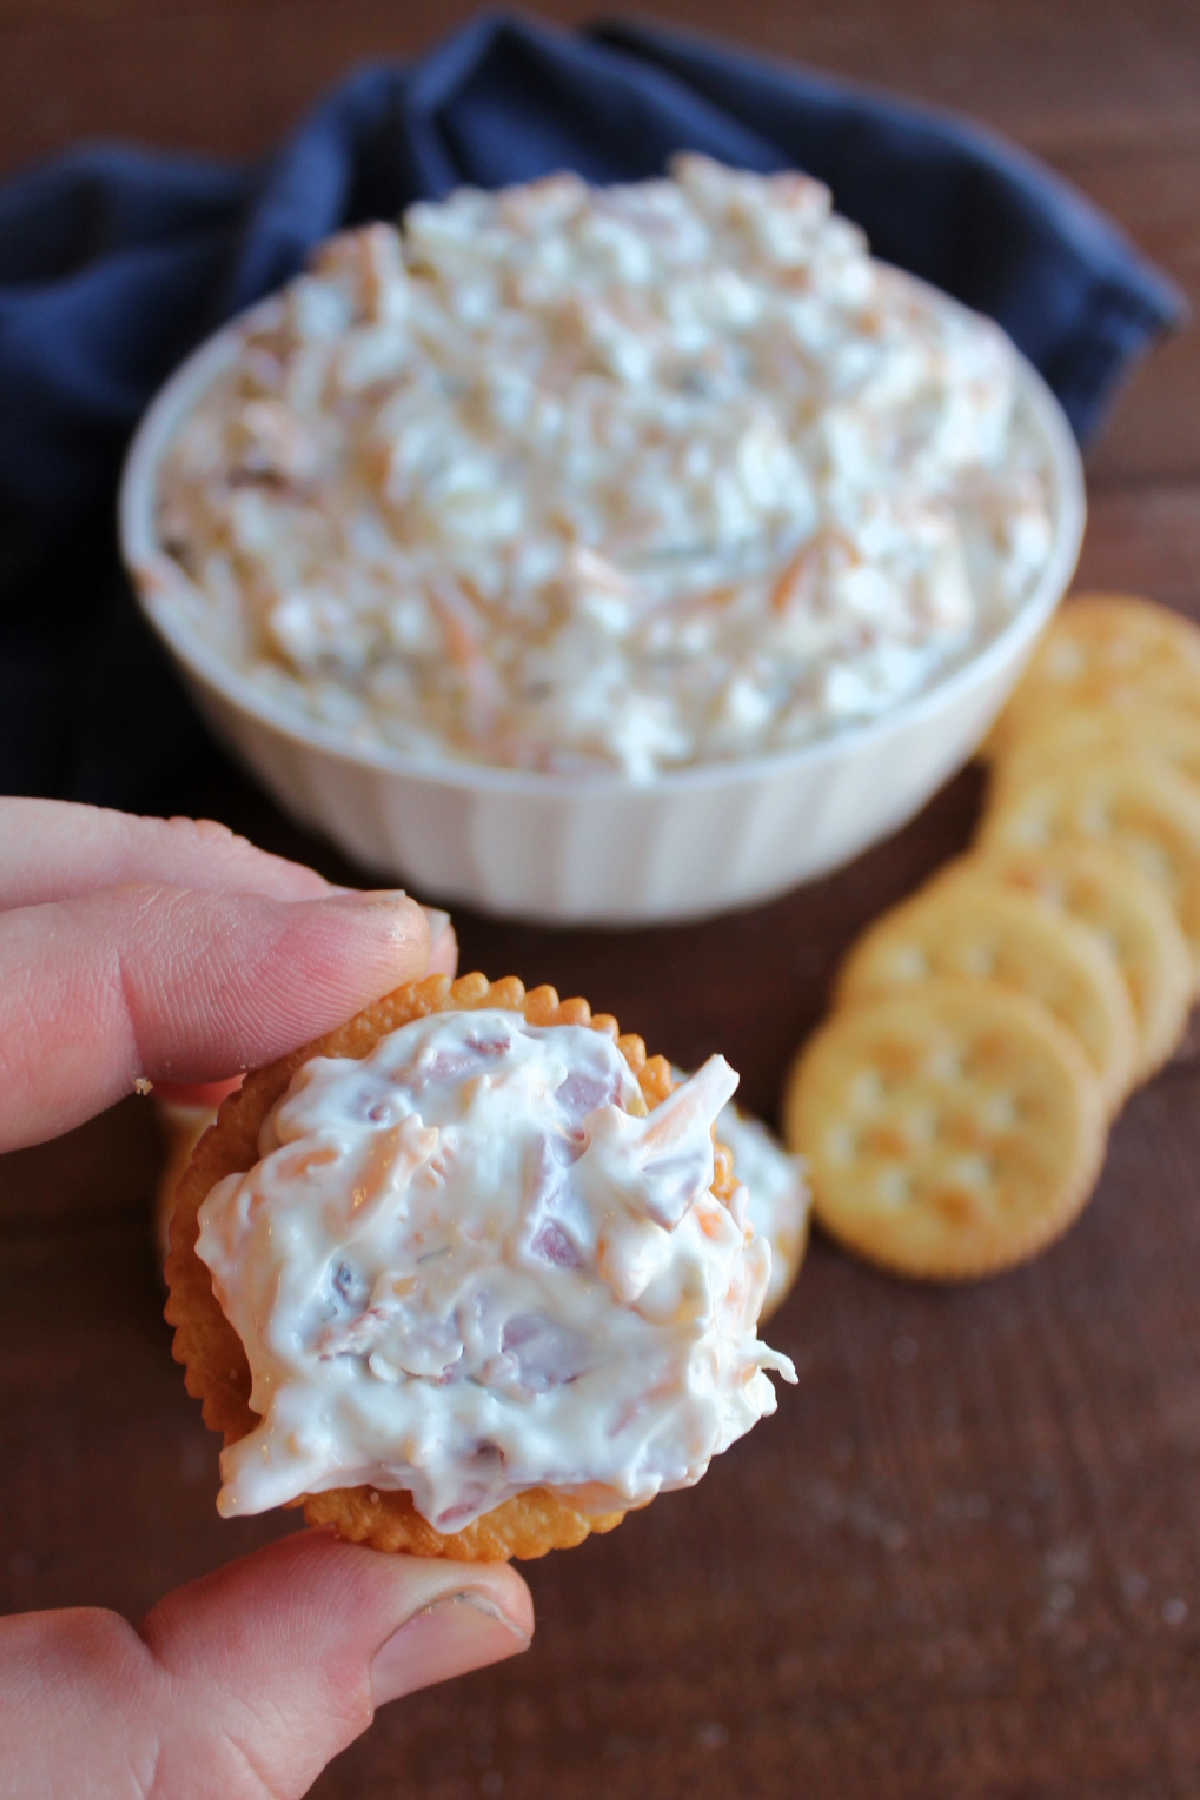 Hand holding Ritz cracker with dill pickle dip spread over the top.